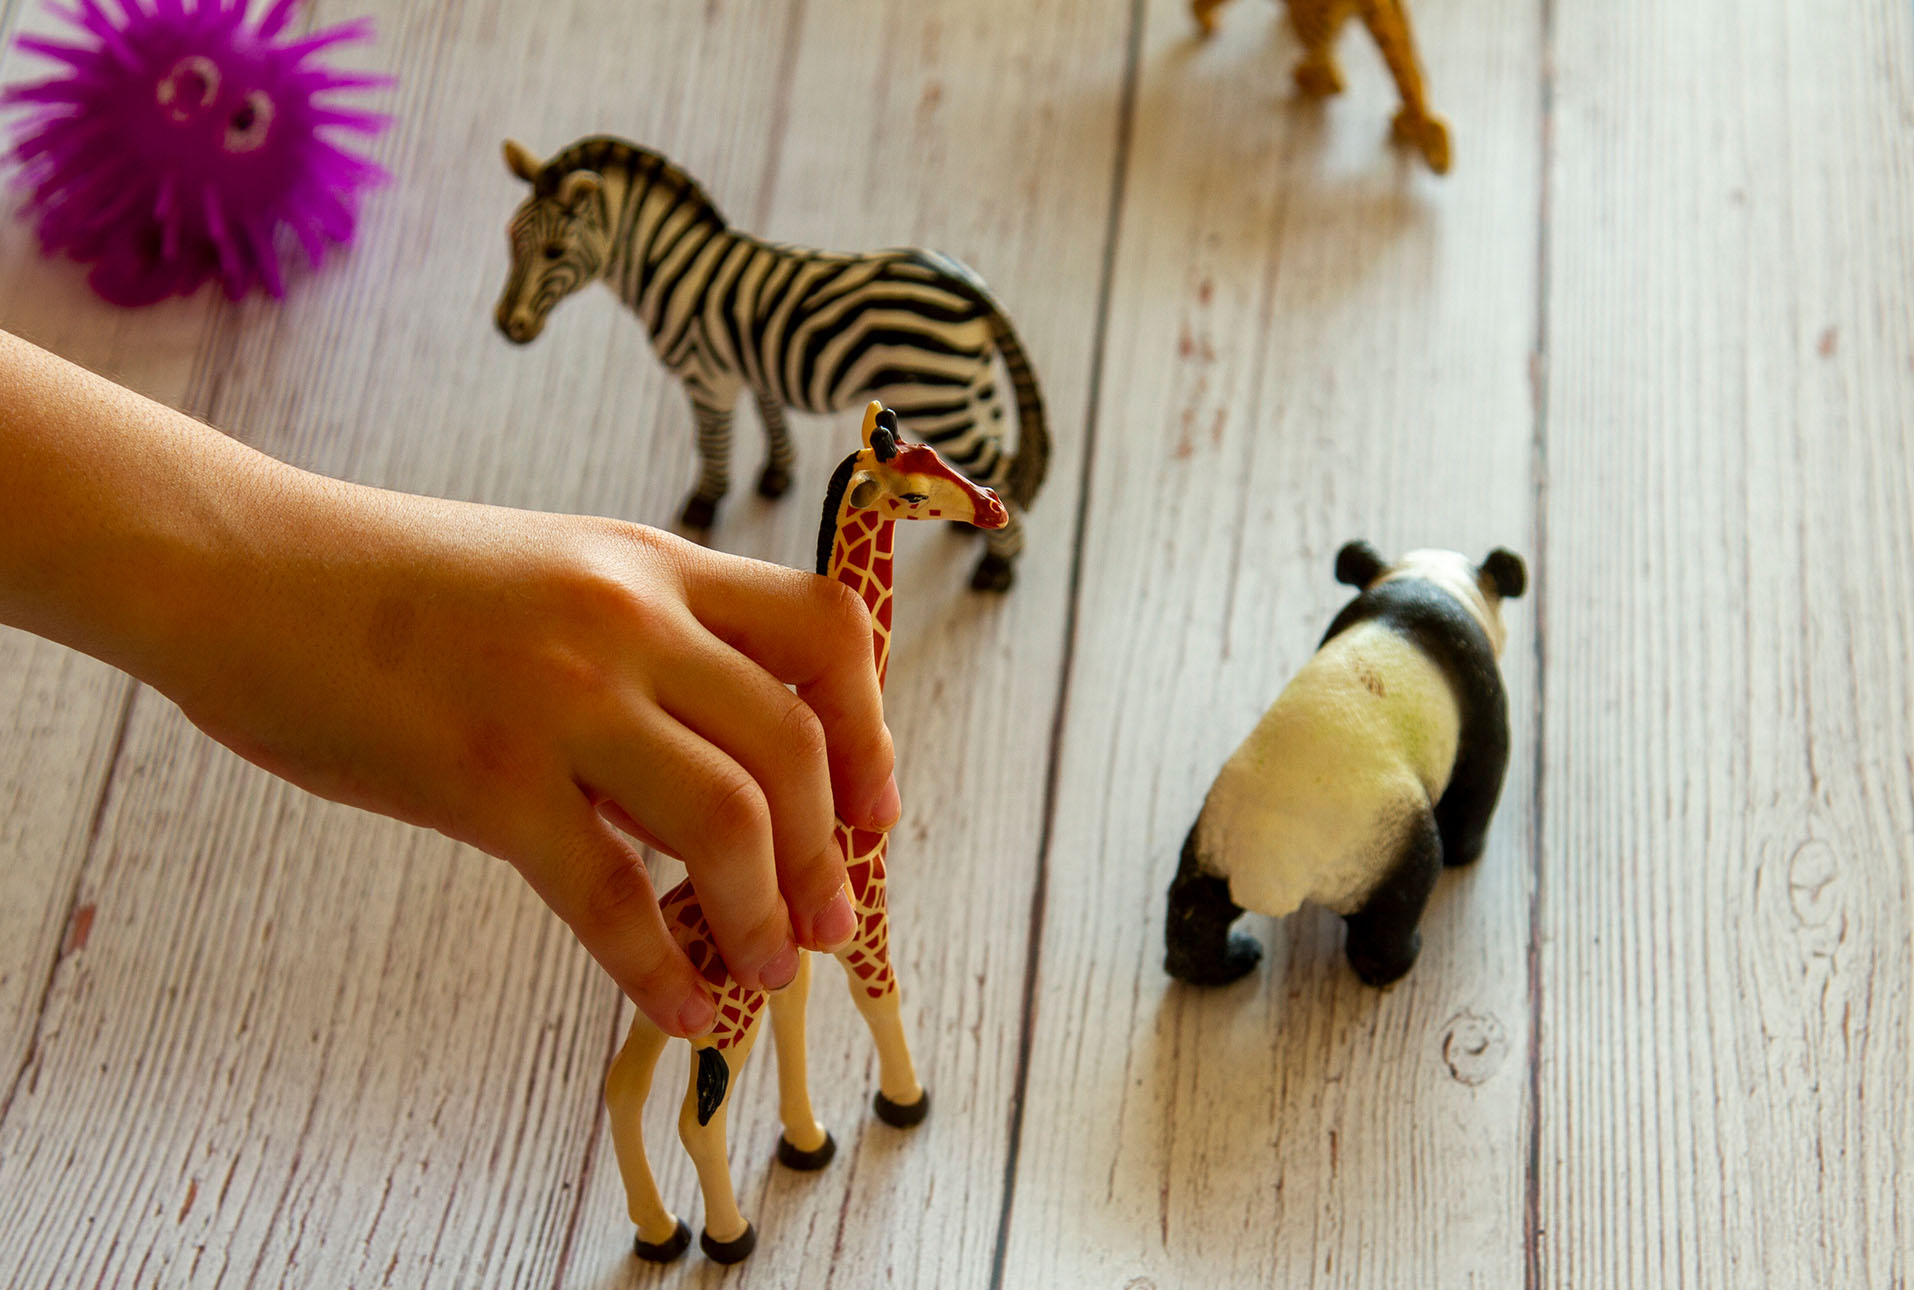 Close up image of a kid's hands as she plays with toy animal figures on a wooden bench. She places, moves and does voice over with animals according to the story she makes up.